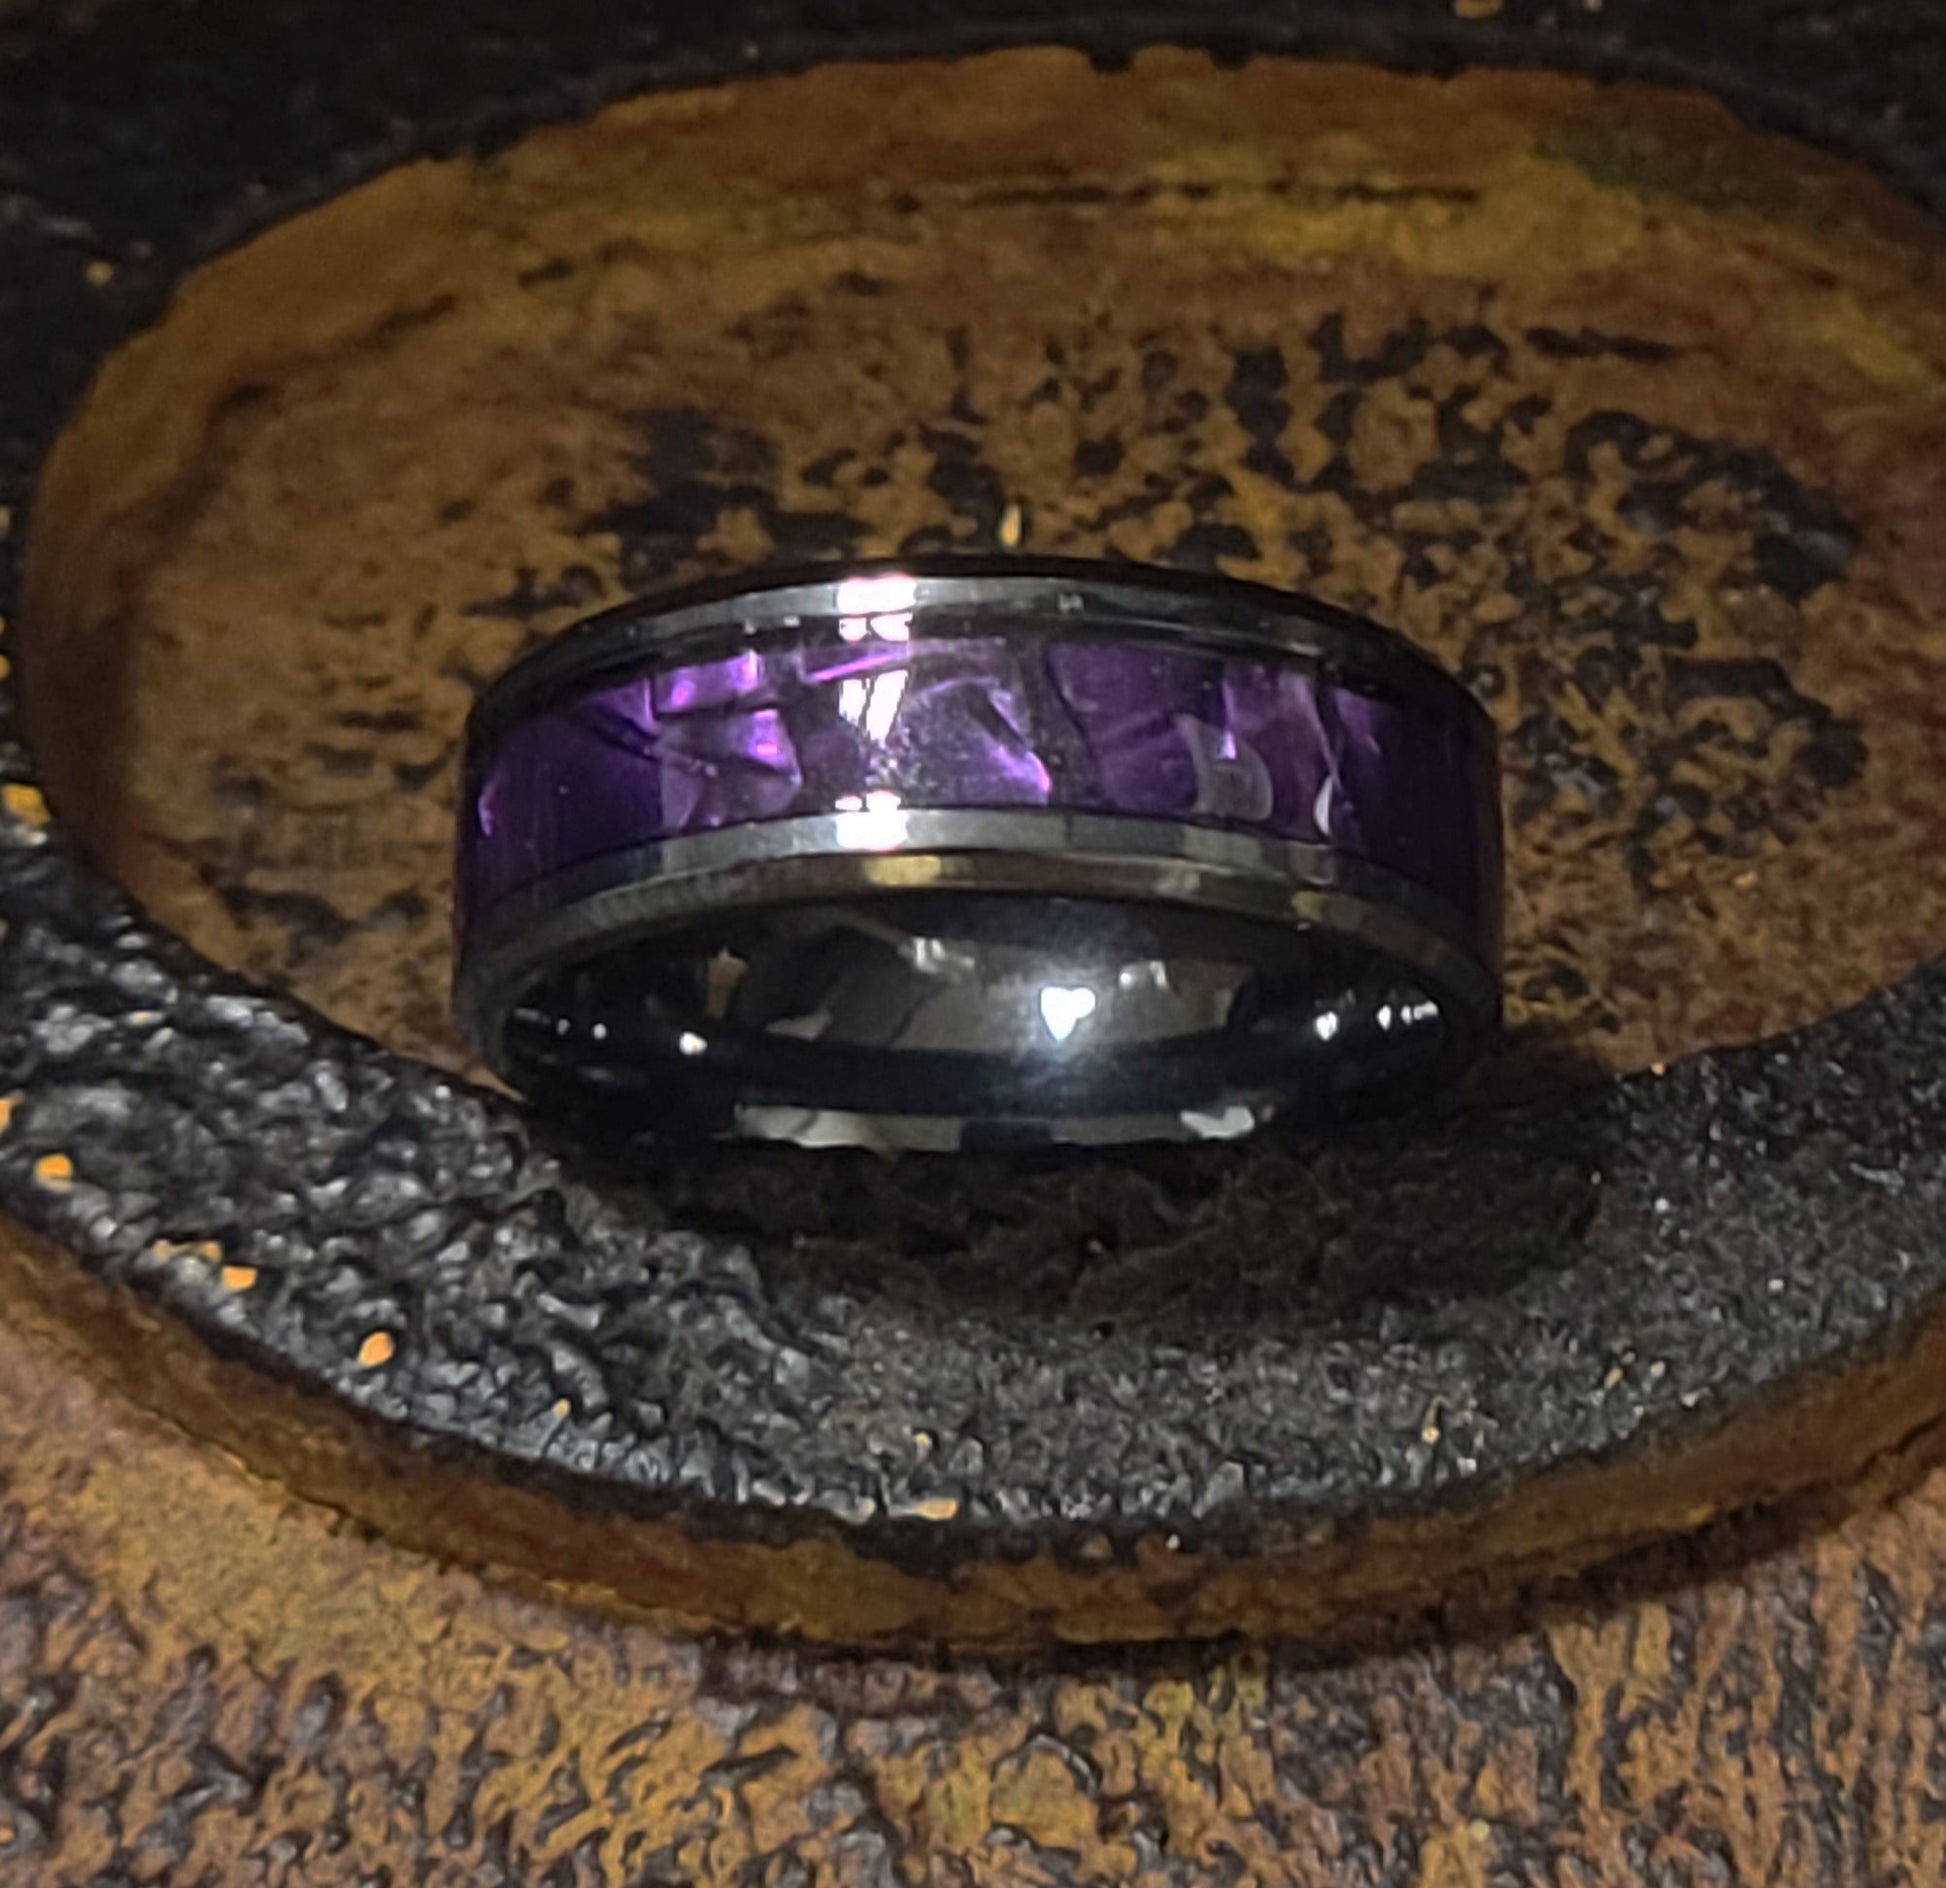 Think Engraved Promise Ring Personalized Engraved Men's Promise Ring Chorite Purple - Handwriting Ring